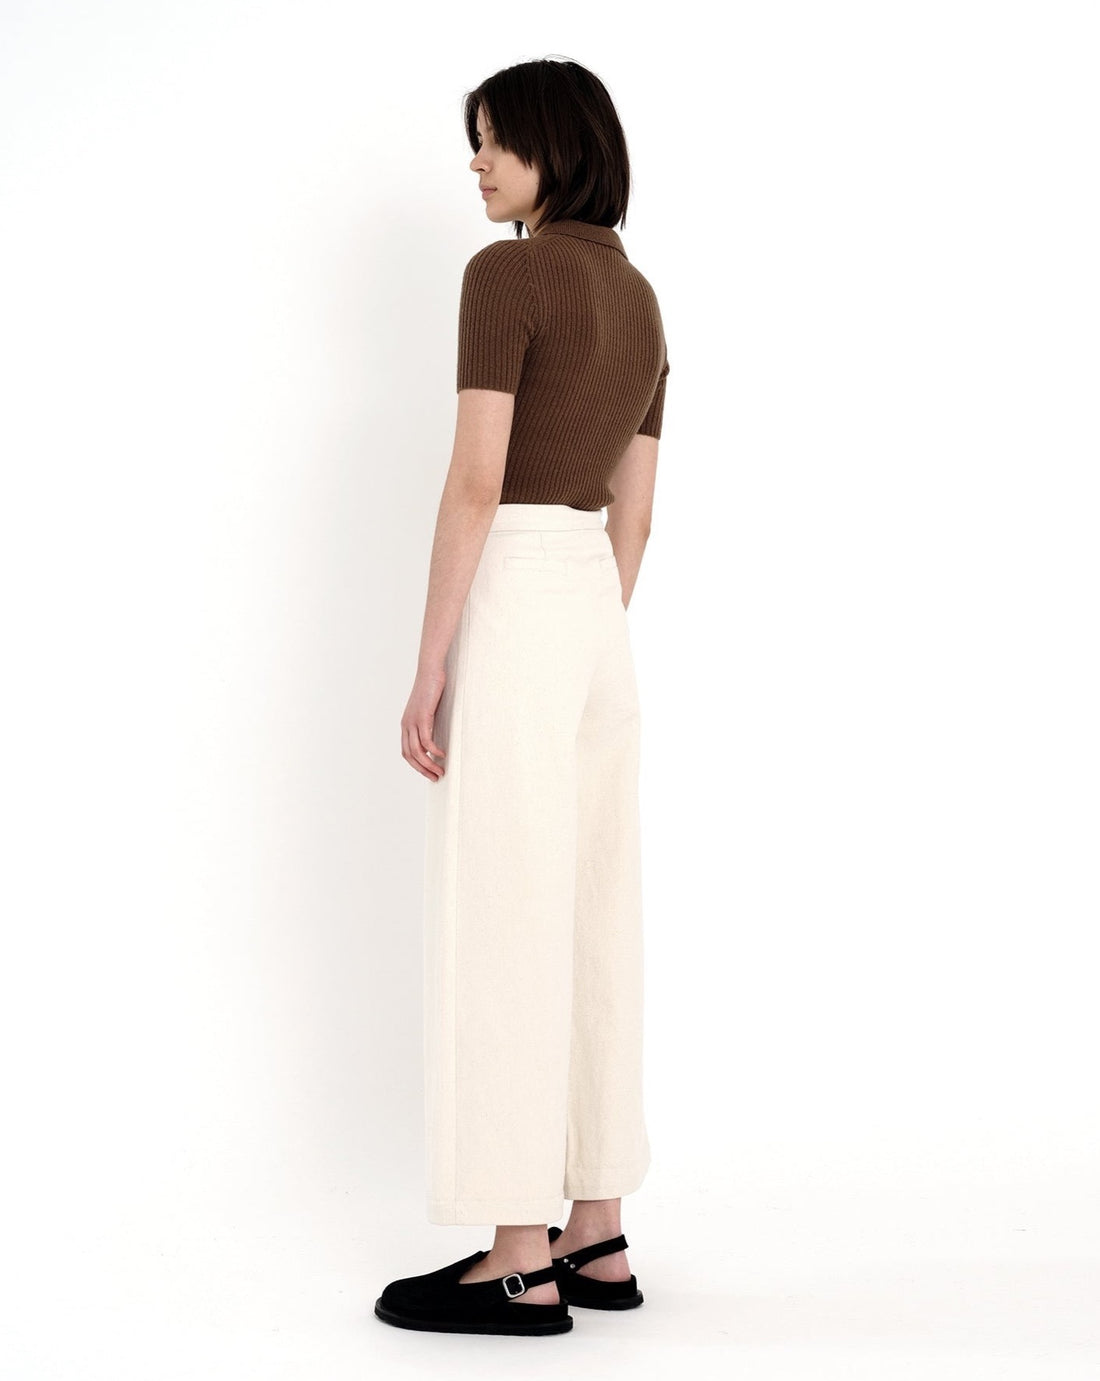 Molly Collared Short Sleeves - FW22 - Brown